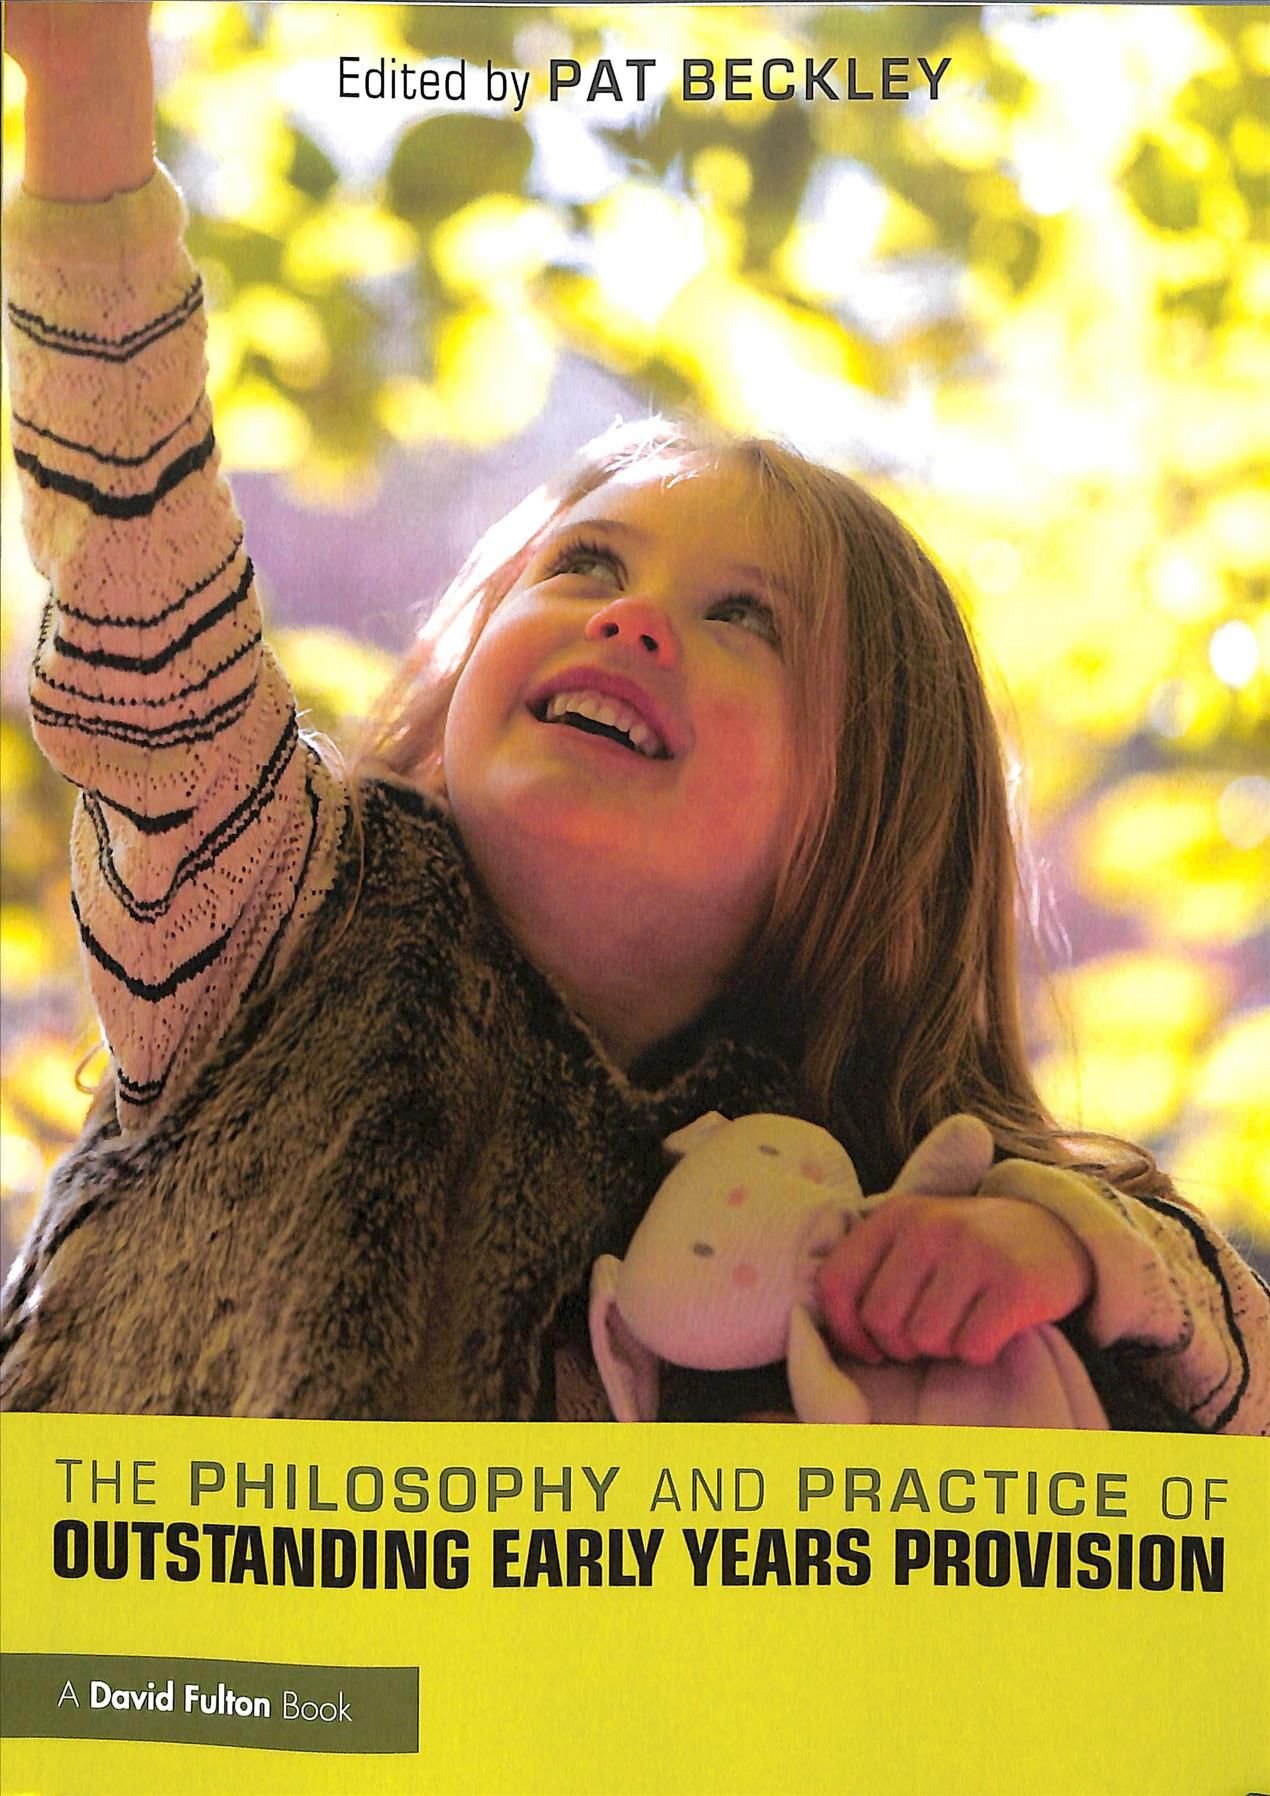 The Philosophy and Practice of Outstanding Early Years Provision